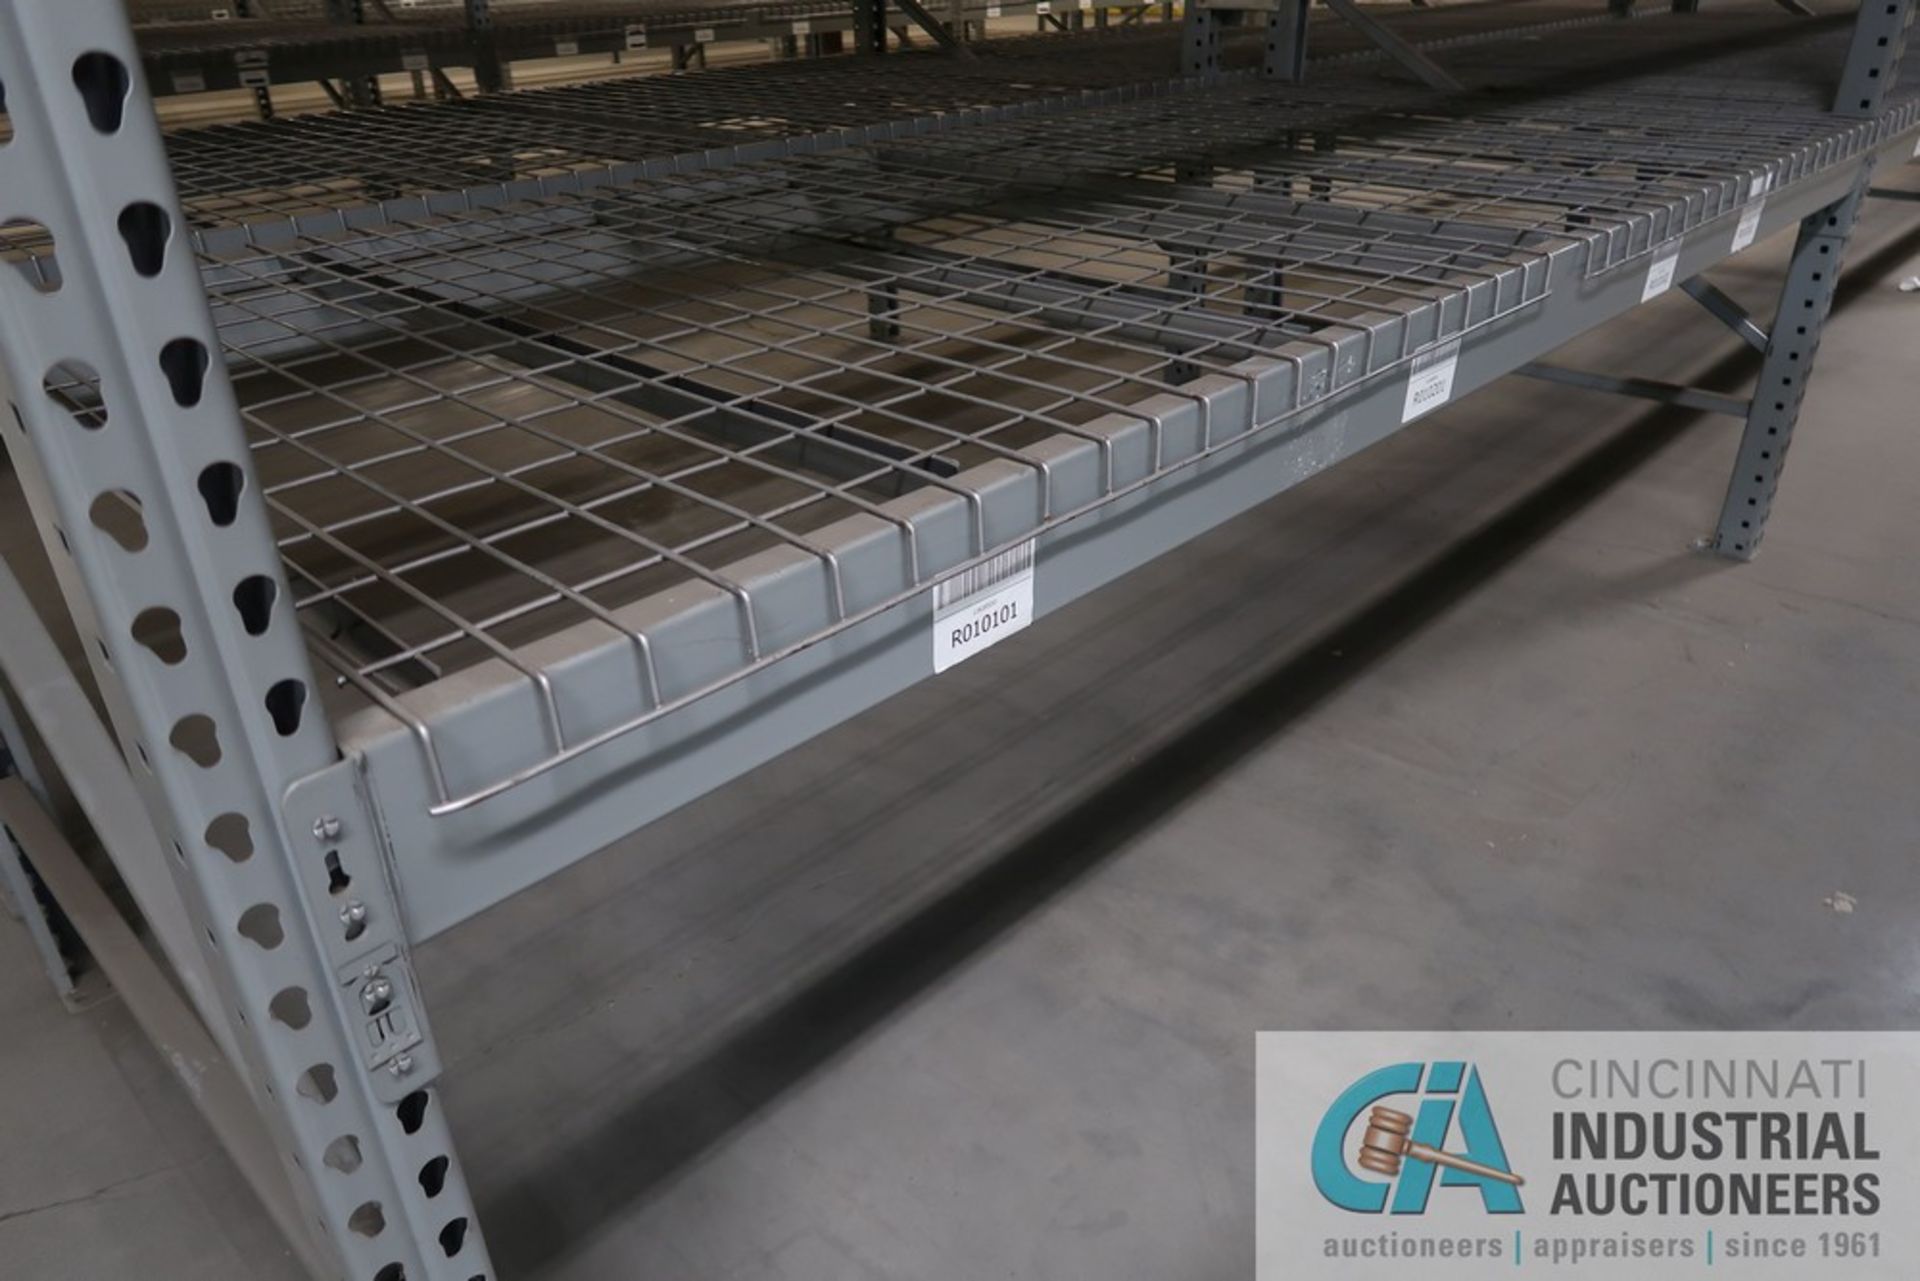 SECTIONS 50" X 108" X 96" HIGH SPACERAK TEAR DROP STYLE ADJUSTABLE BEAM PALLET WITH WIRE DECKING - Image 4 of 6